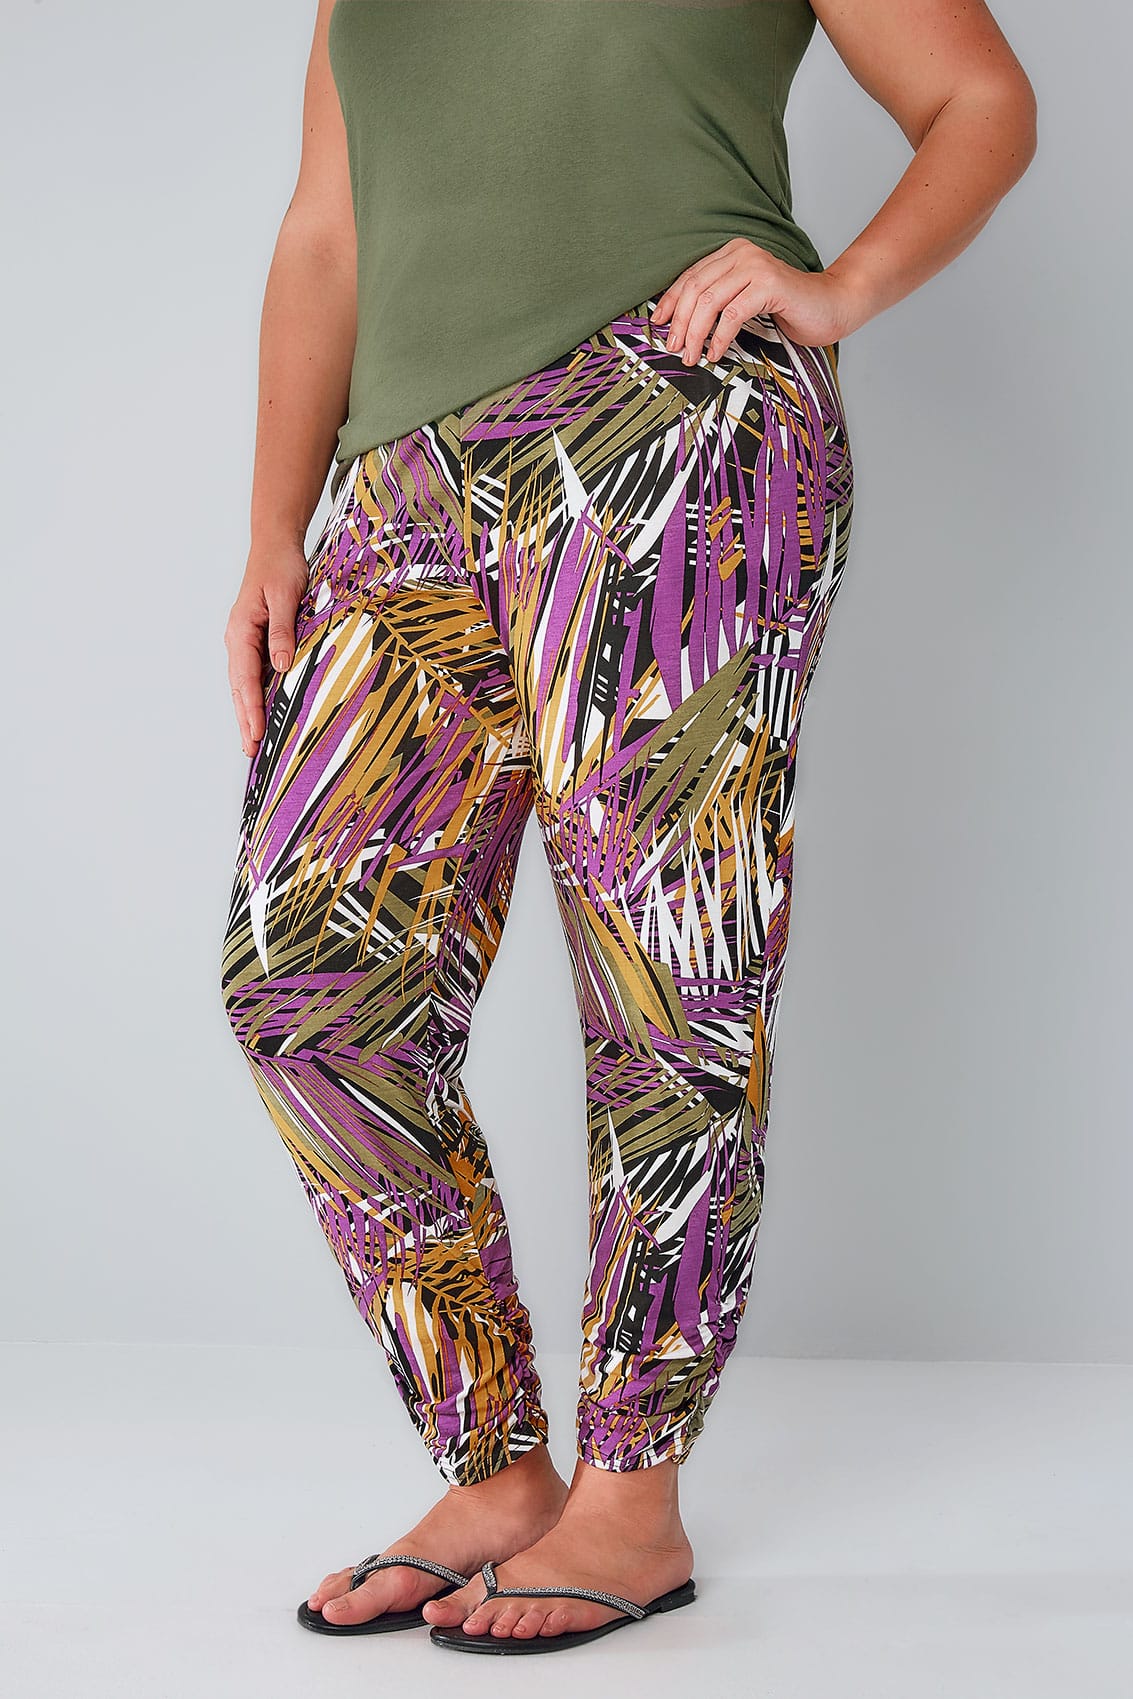 Green & Multi Palm Print Harem Trousers, Plus size 16 to 36